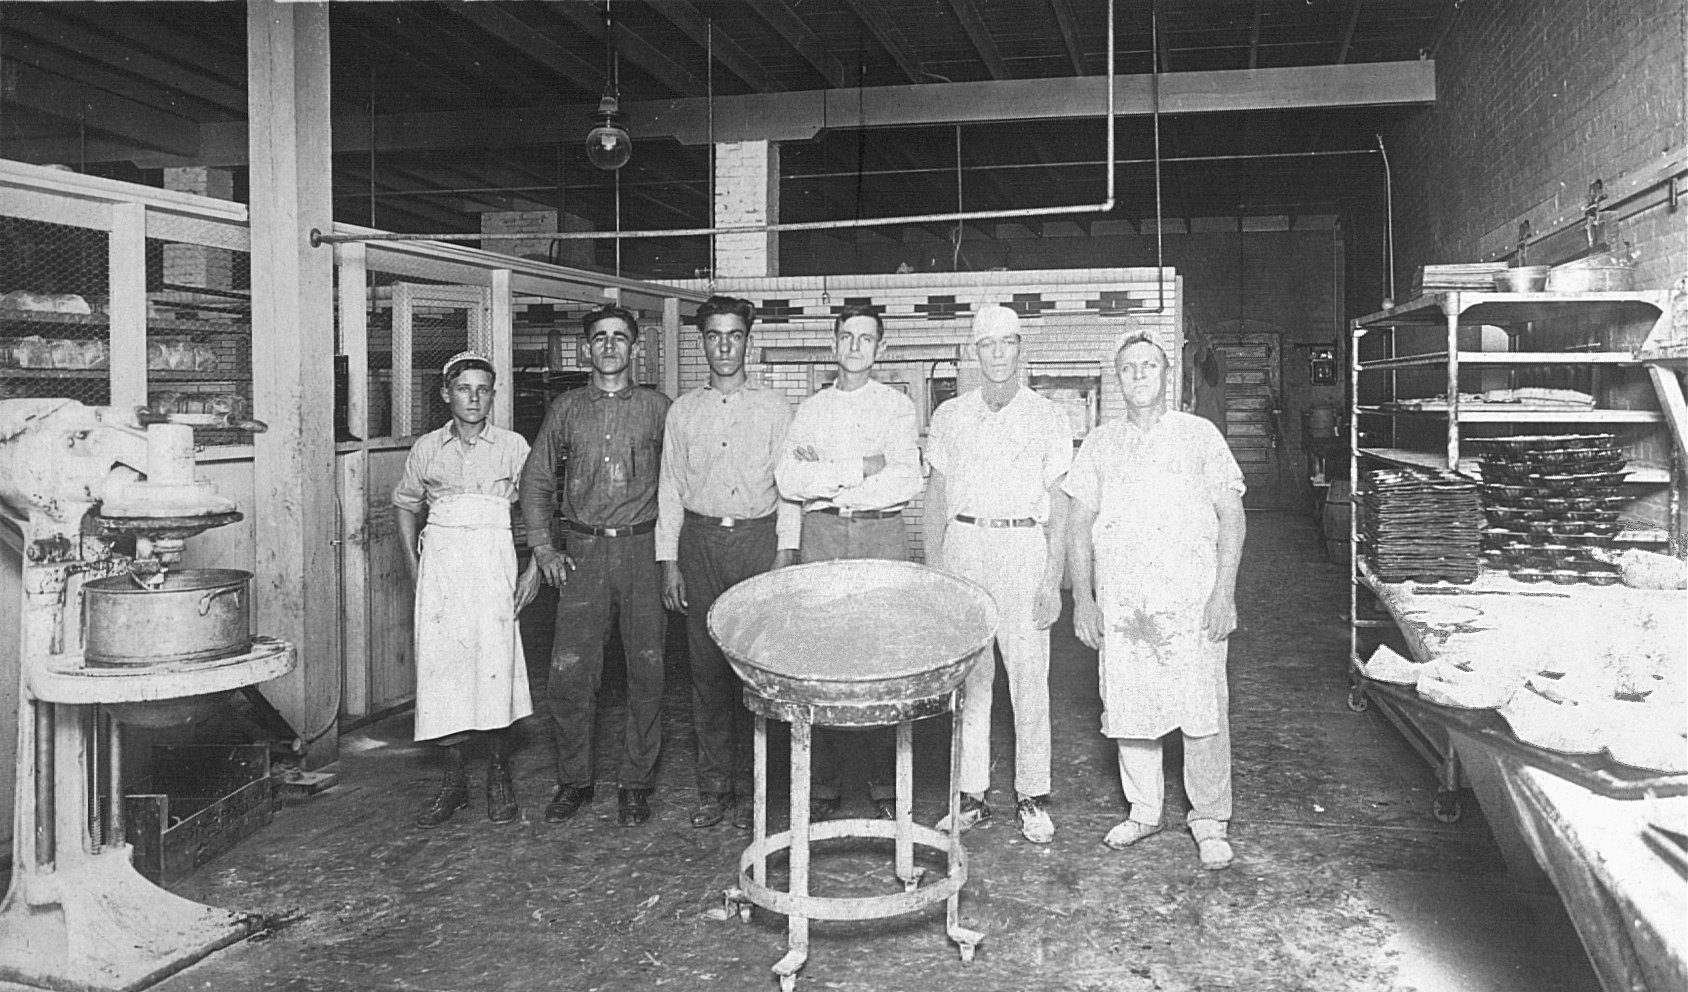 The Biloxi Bakery workers of 1913 - the founder, Fred Klein Sr. is in the middle - arms folded.  Famed for his New Orleans style french bread, he operated the bakery until his retirement in 1964.  His three sons operated the bakery until 1973 when it was demolished to make way for an urban renewal project - that subsequently failed! No air conditioning, no overhead lighting (except for the gas mantle globed lamps), just lots of flour!